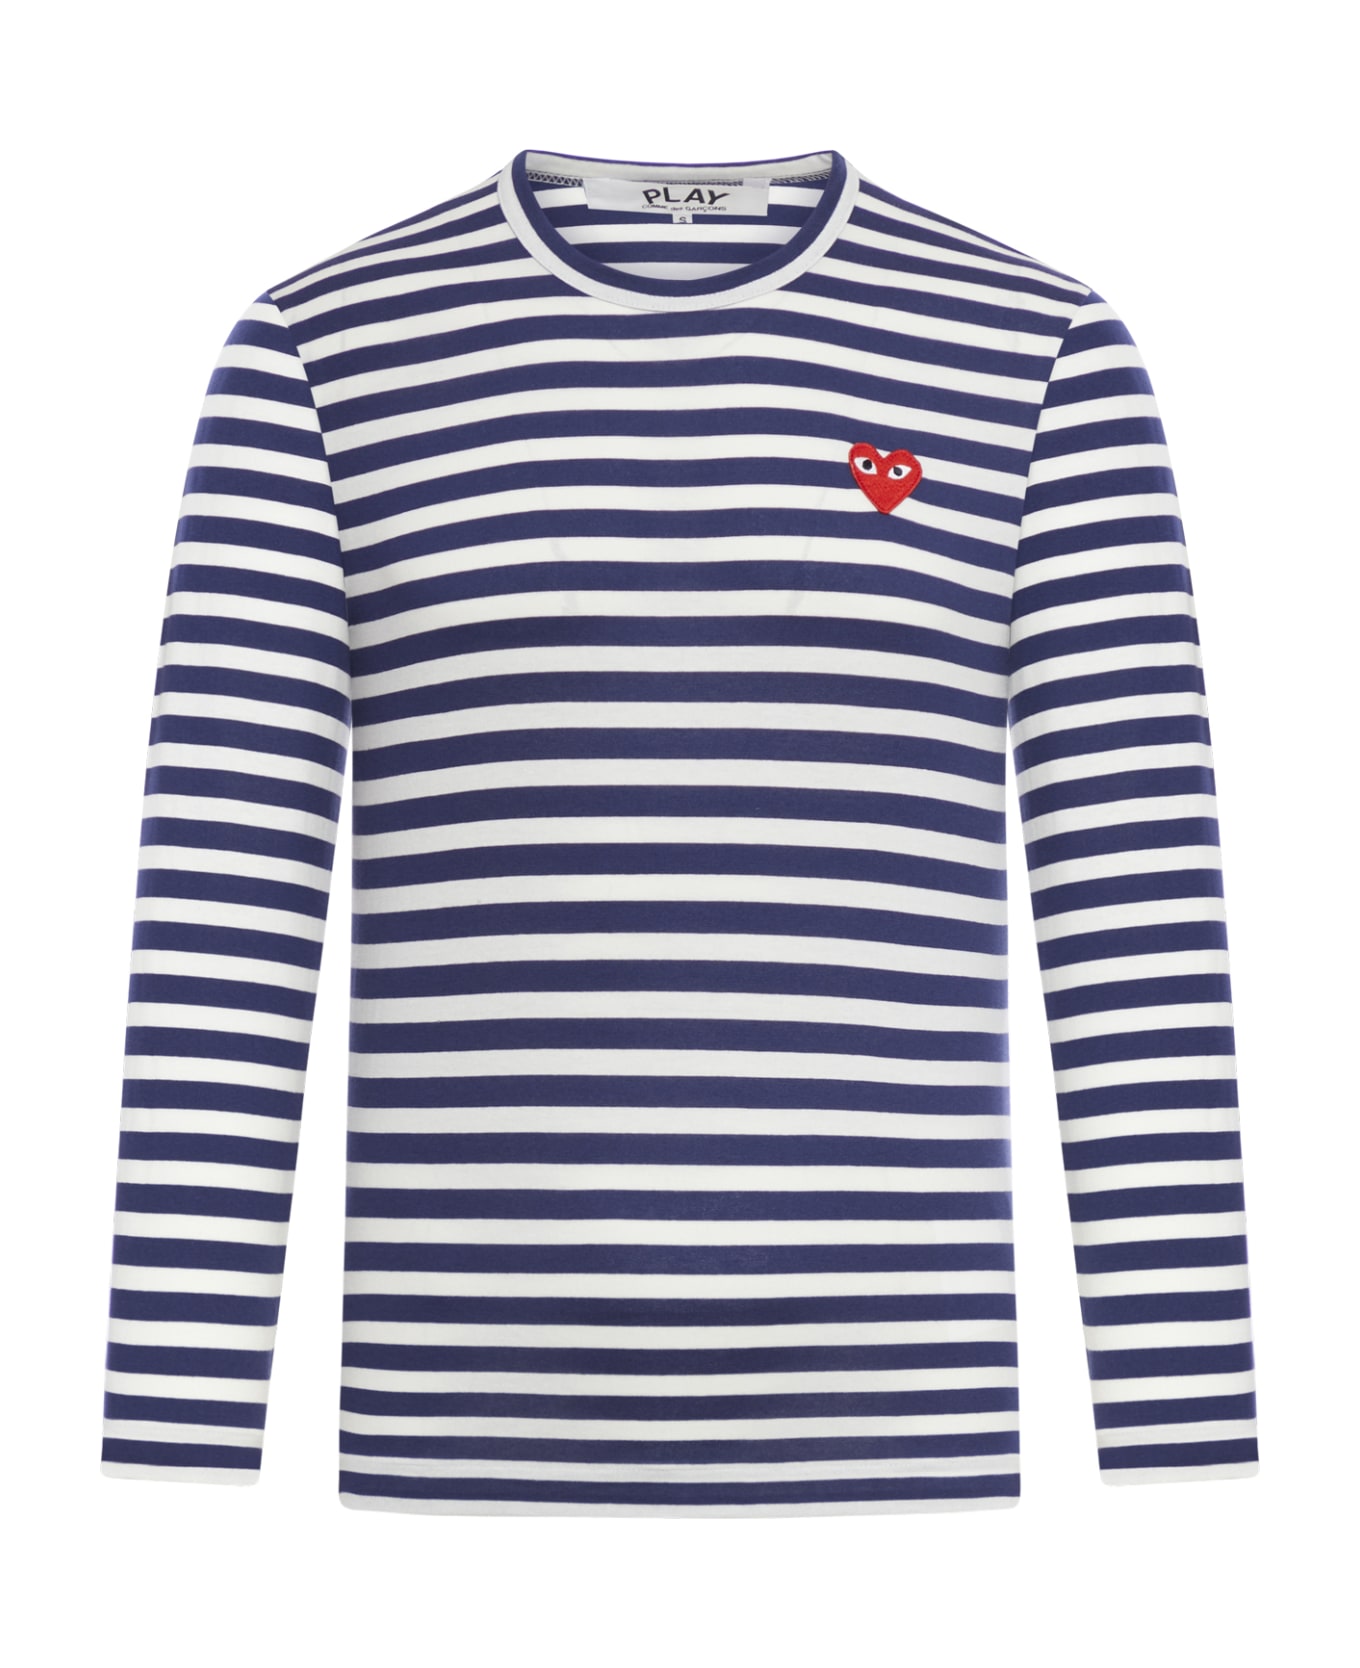 Comme des Garçons Play Play Striped T-shirt Red Heart - Navy White シャツ